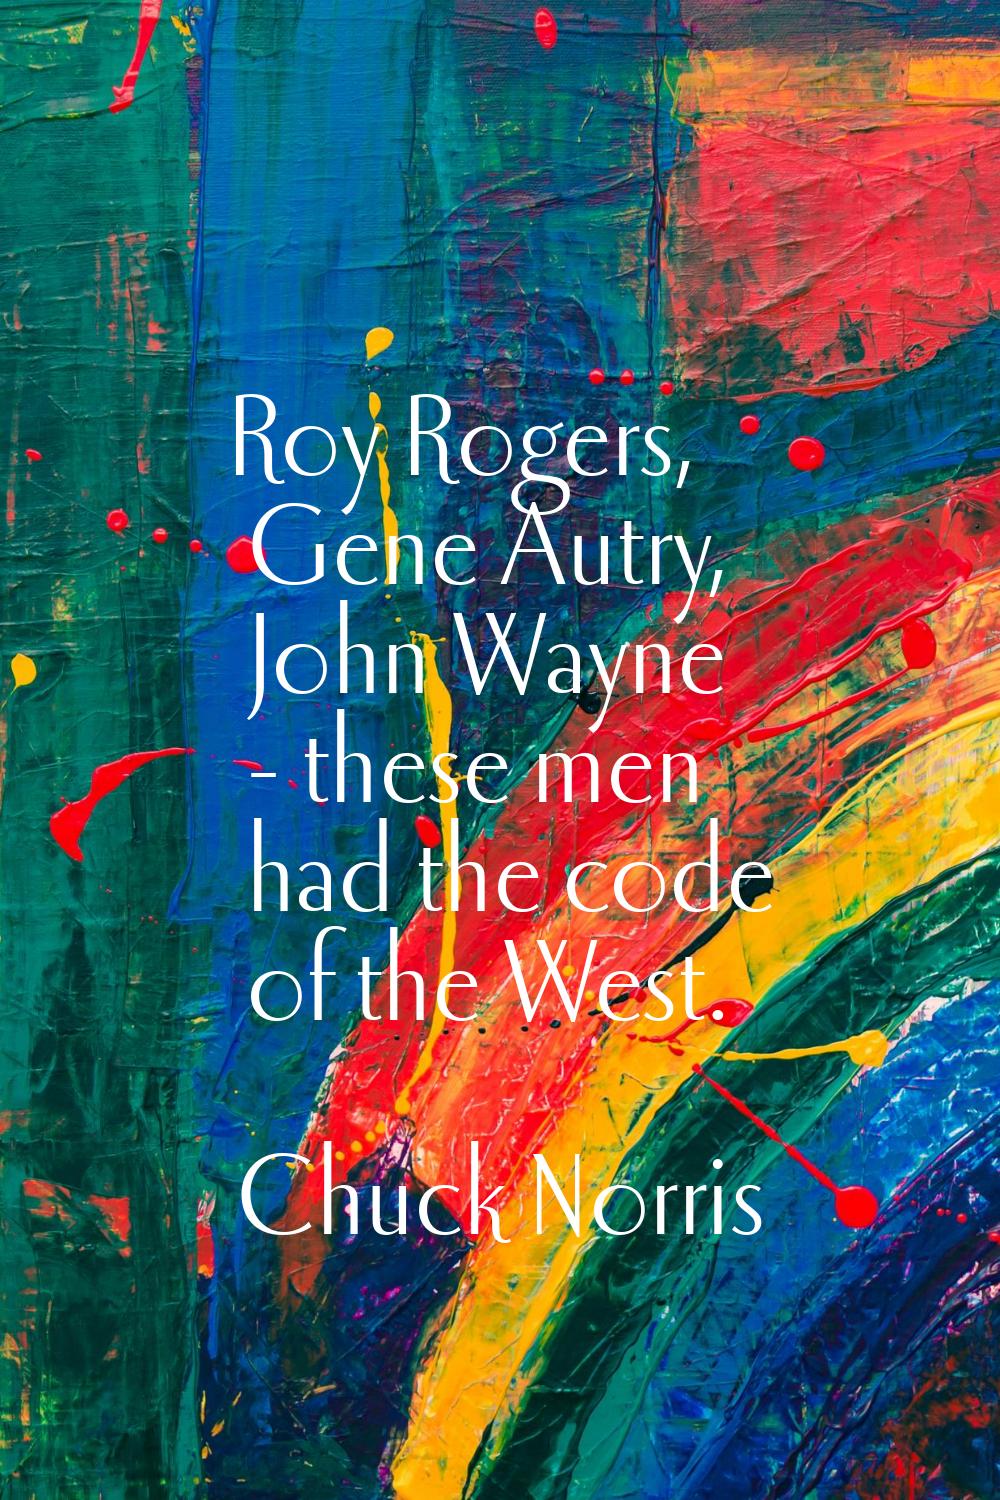 Roy Rogers, Gene Autry, John Wayne - these men had the code of the West.